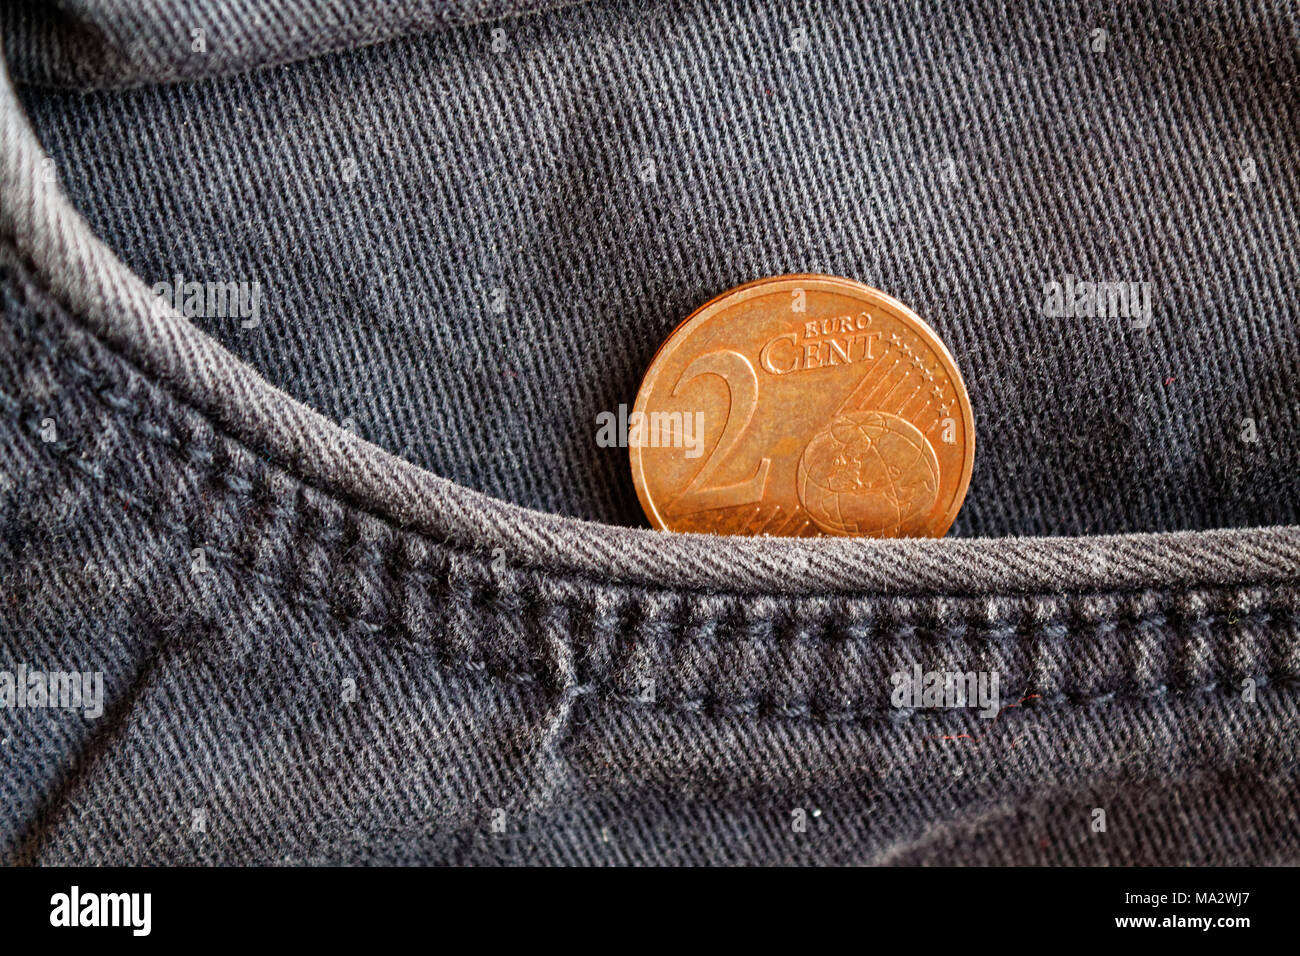 Euro coin with a denomination of 2 euro cent in the pocket of worn blue denim jeans Stock Photo